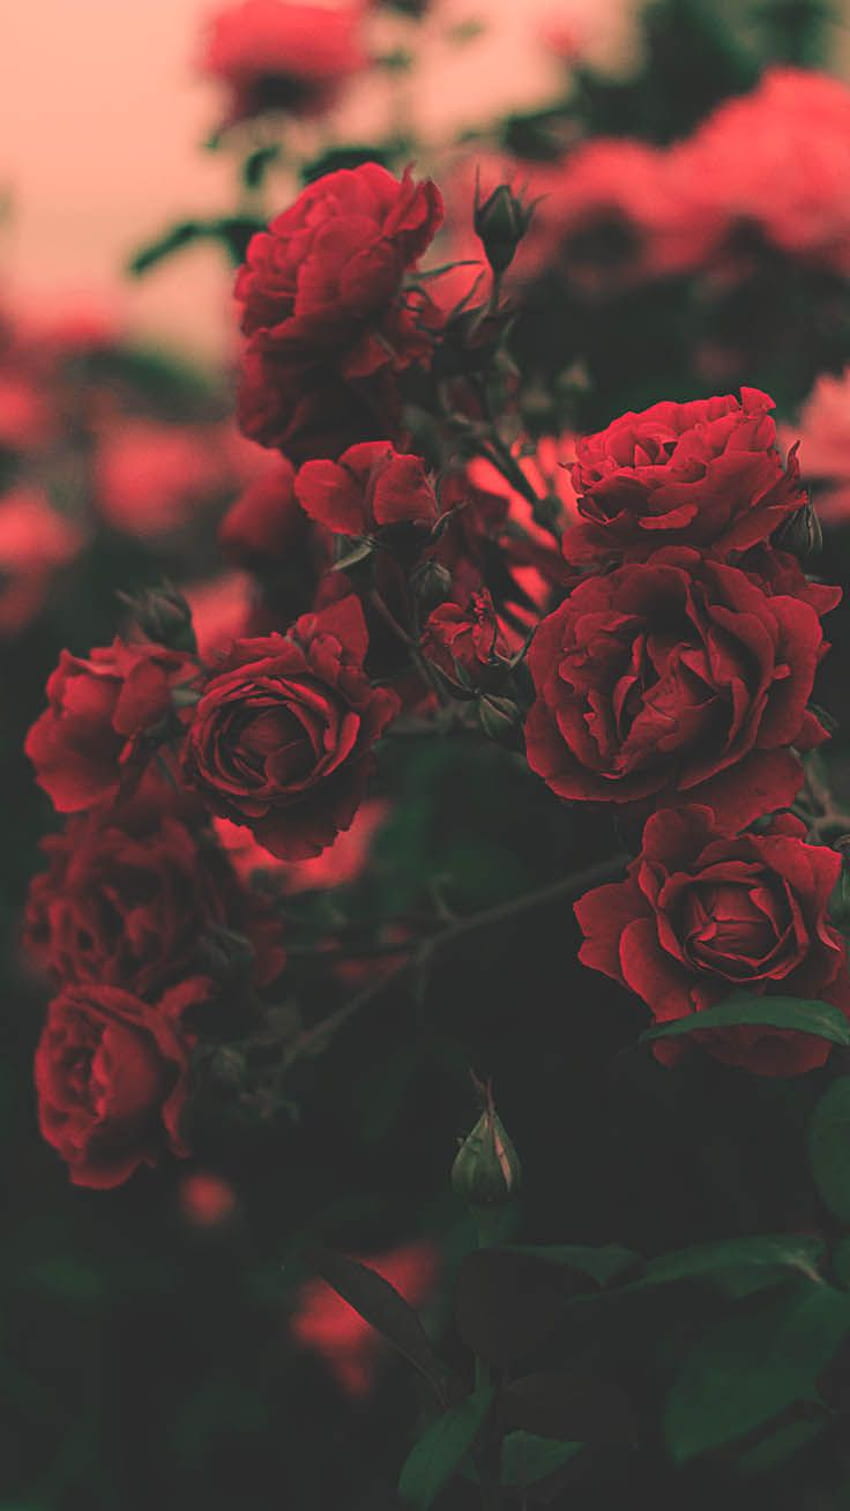 beautiful rose wallpaper Images • - (@shybzzz459) on ShareChat